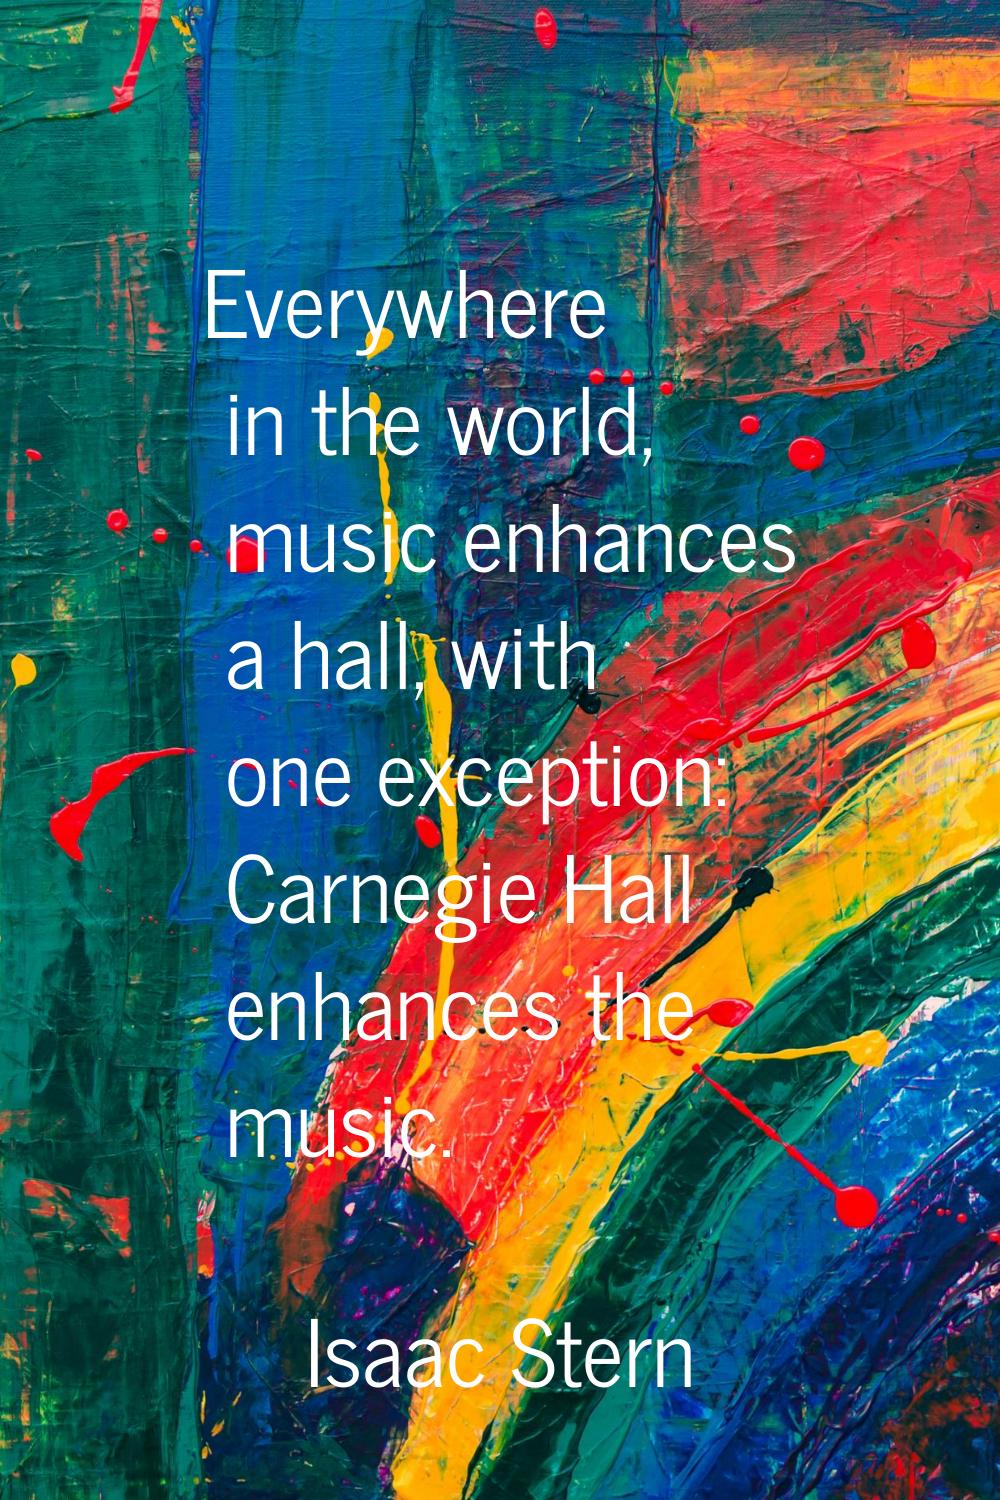 Everywhere in the world, music enhances a hall, with one exception: Carnegie Hall enhances the musi